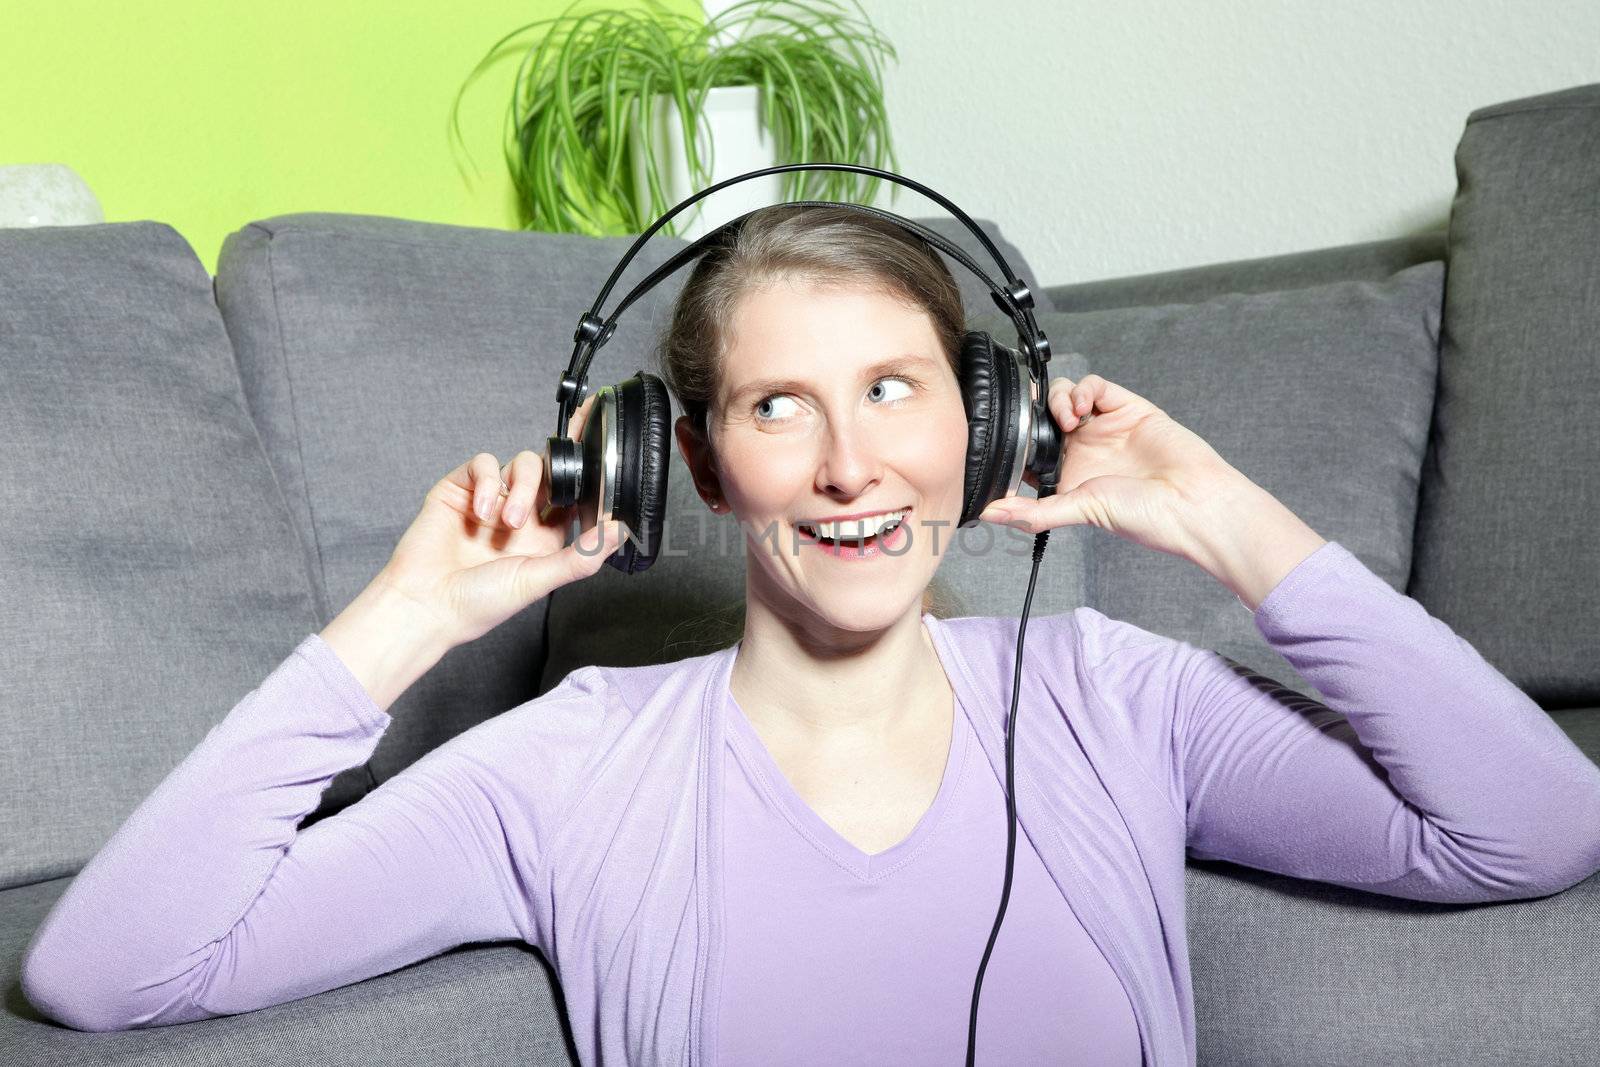 Laughing mature woman listening to music sitting on a couch in her living room wearing a pair of headphones and looking sideways to the left of the frame while facing the camera